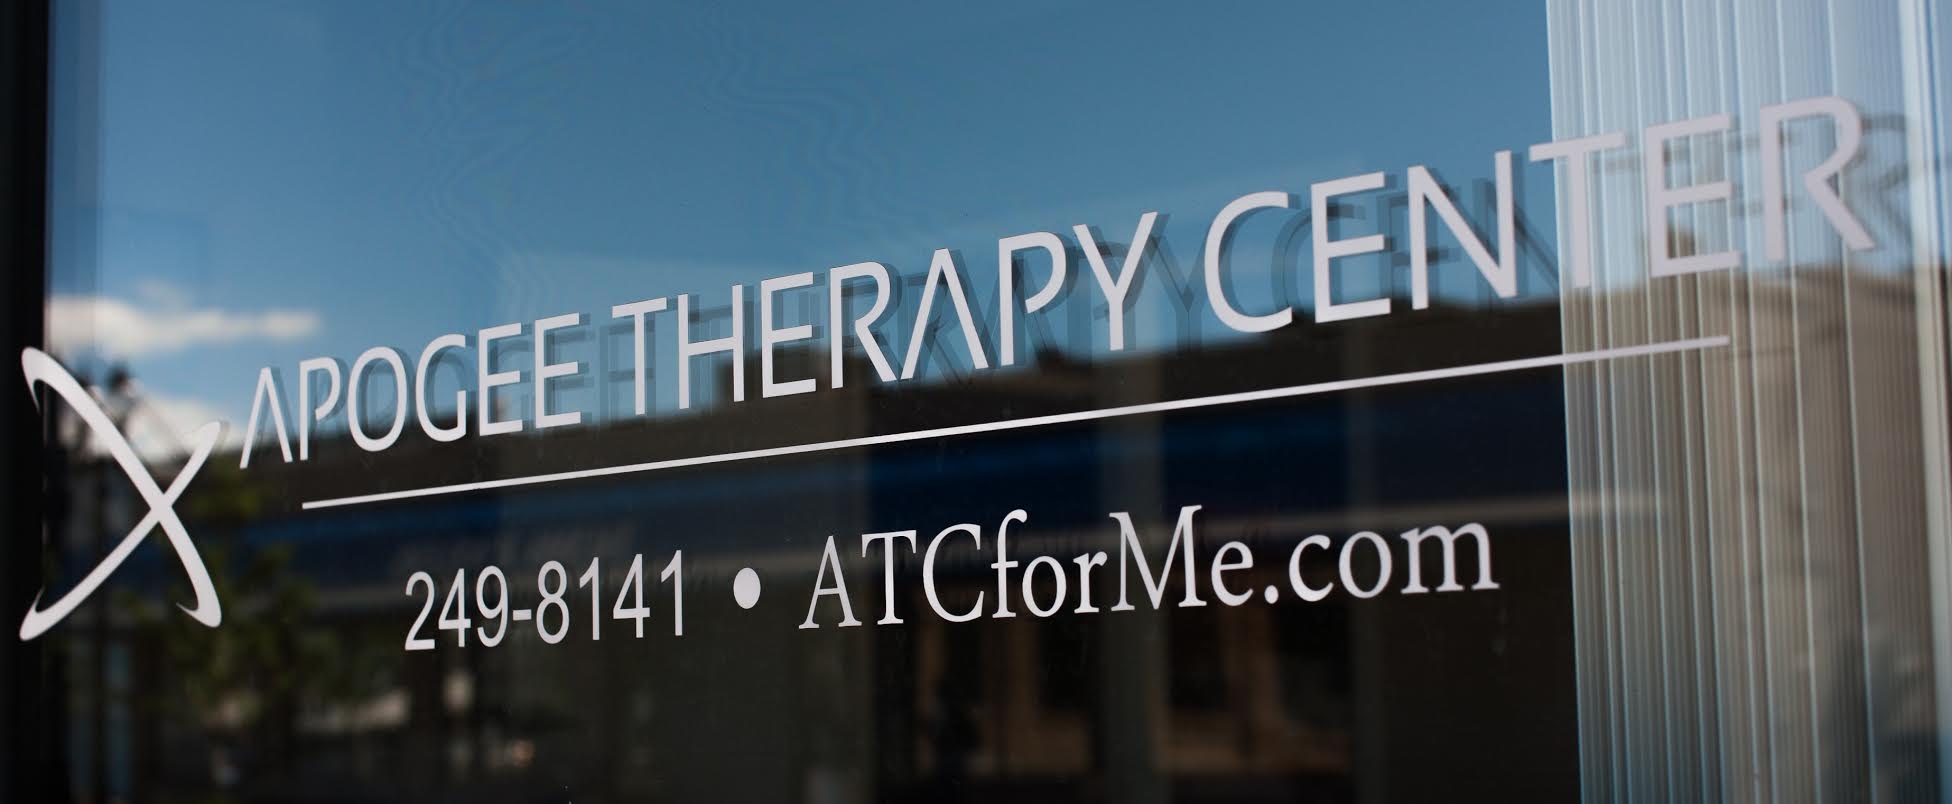 Apogee Therapy Center